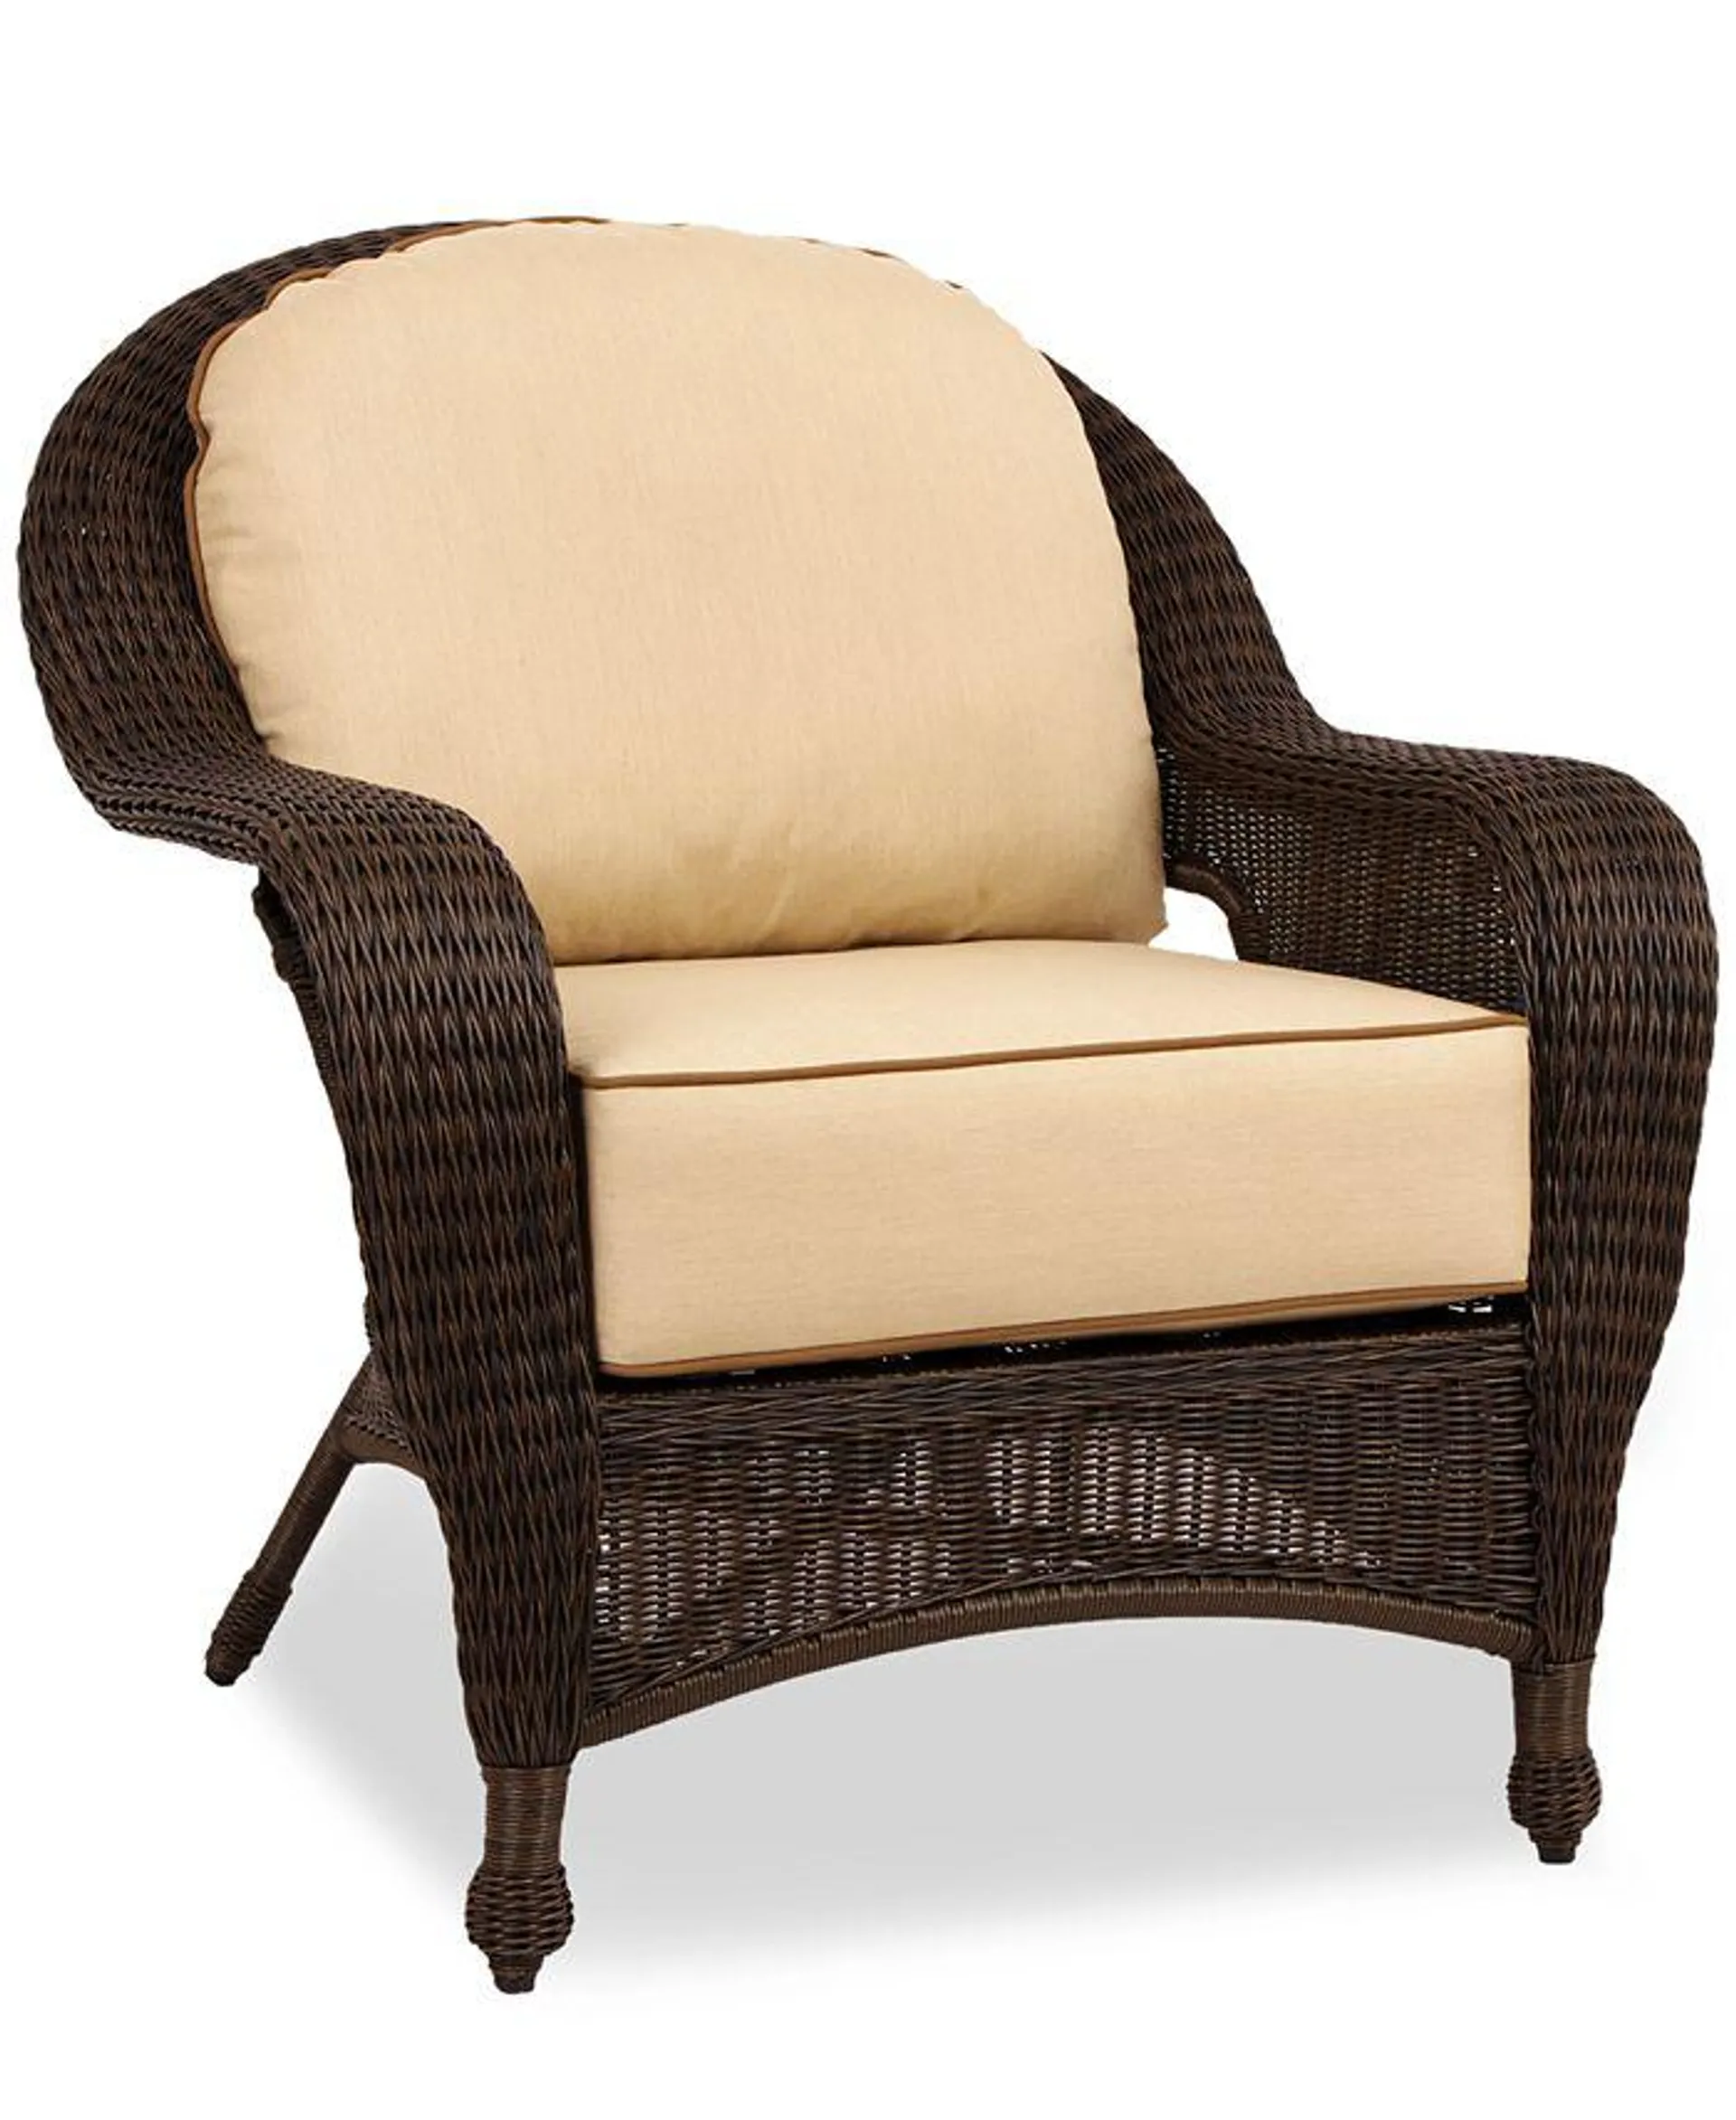 Monterey Wicker Outdoor Club Chair with Sunbrella® Cushions, Created for Macy's